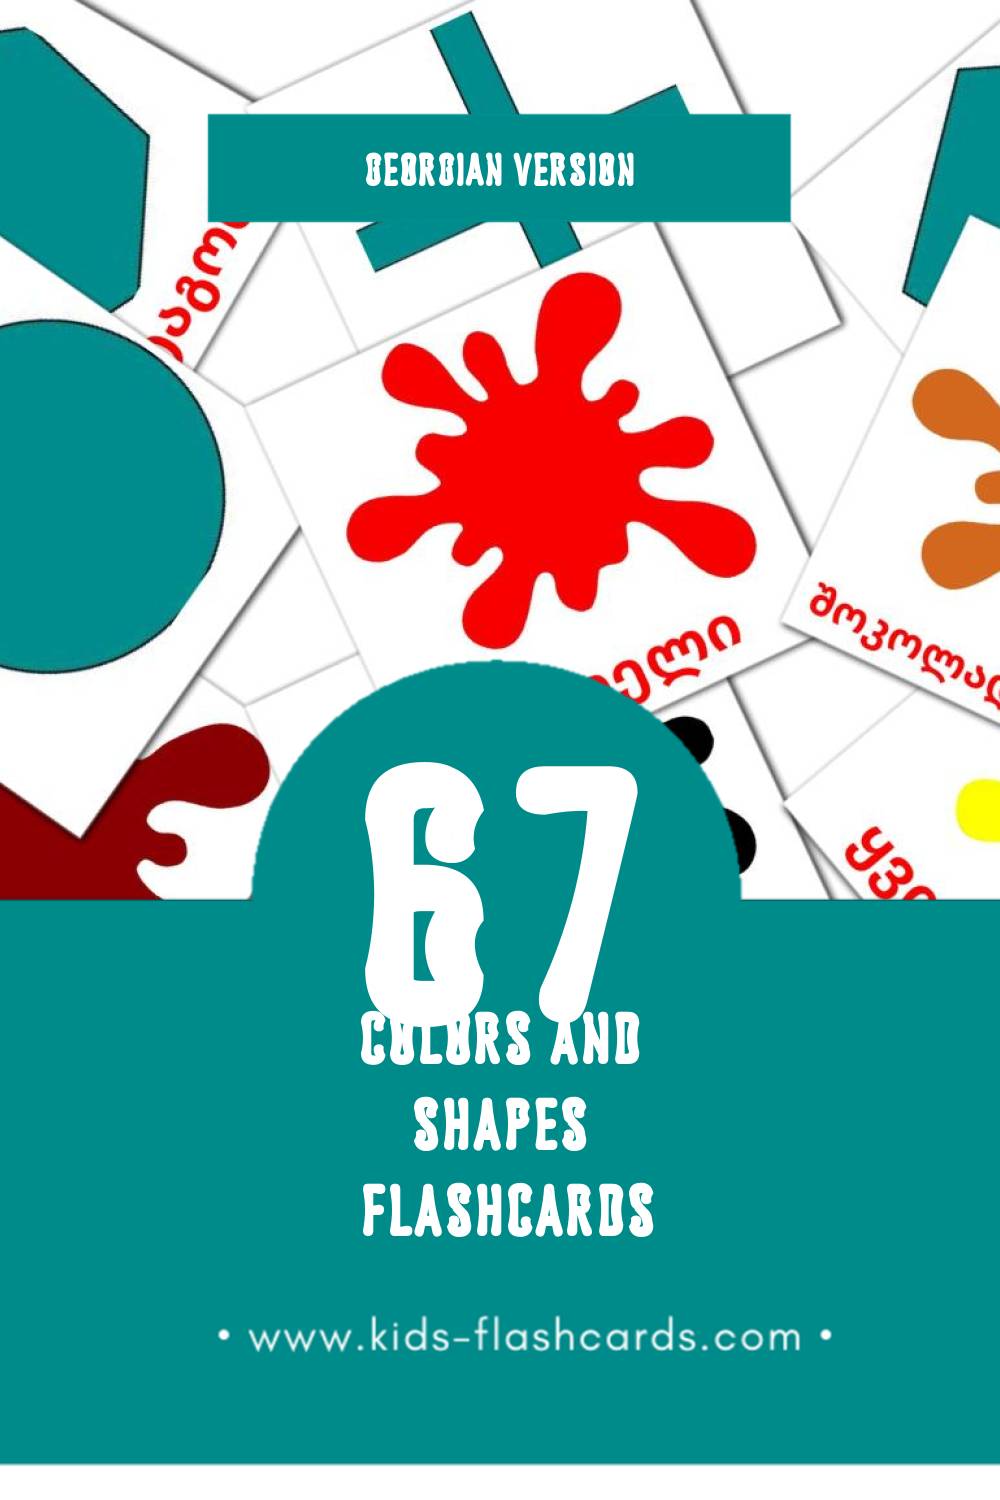 Visual ფერები Flashcards for Toddlers (67 cards in Georgian)